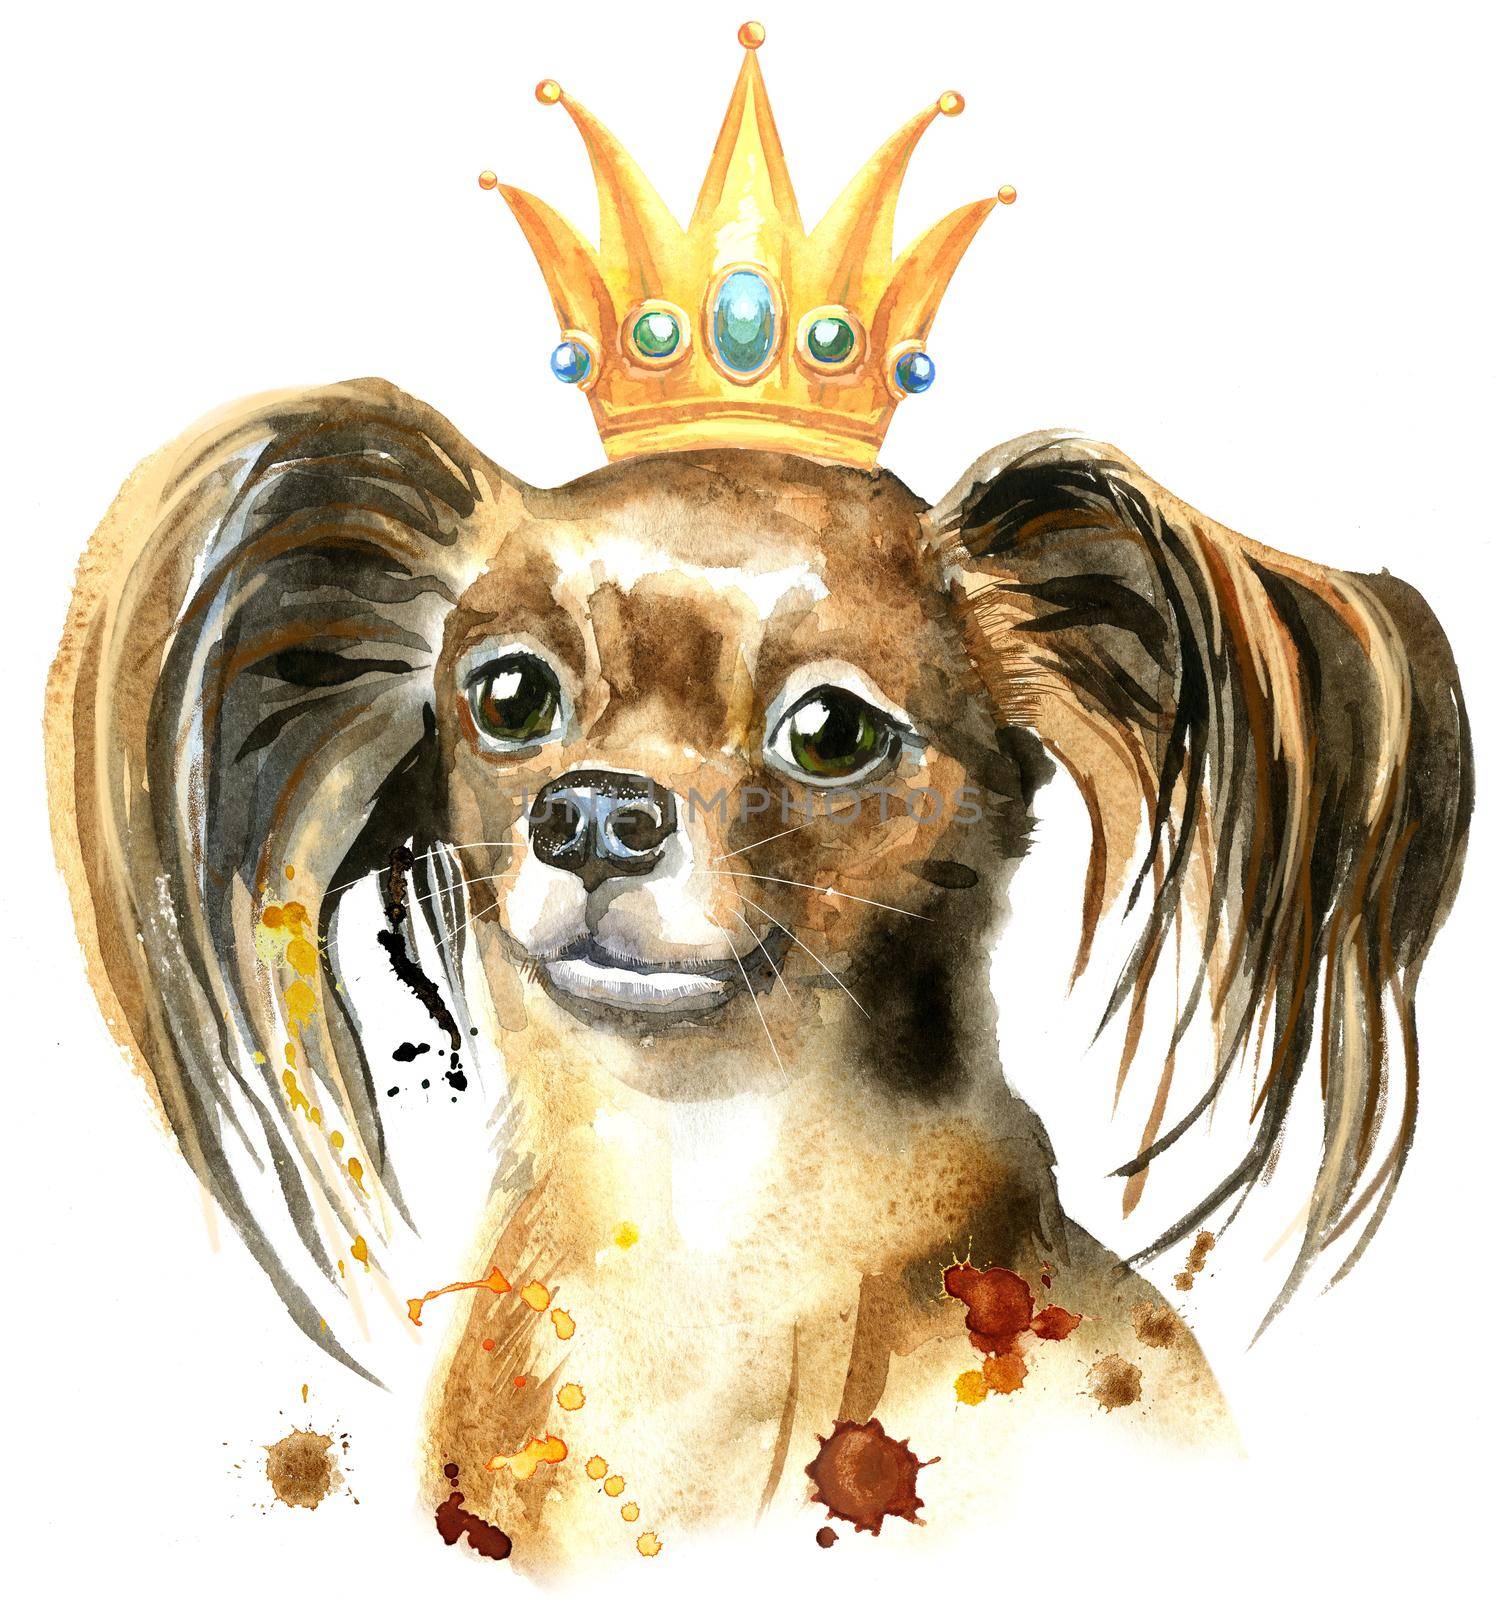 Cute Dog. Dog T-shirt graphics. watercolor toyl terrier with crown illustration